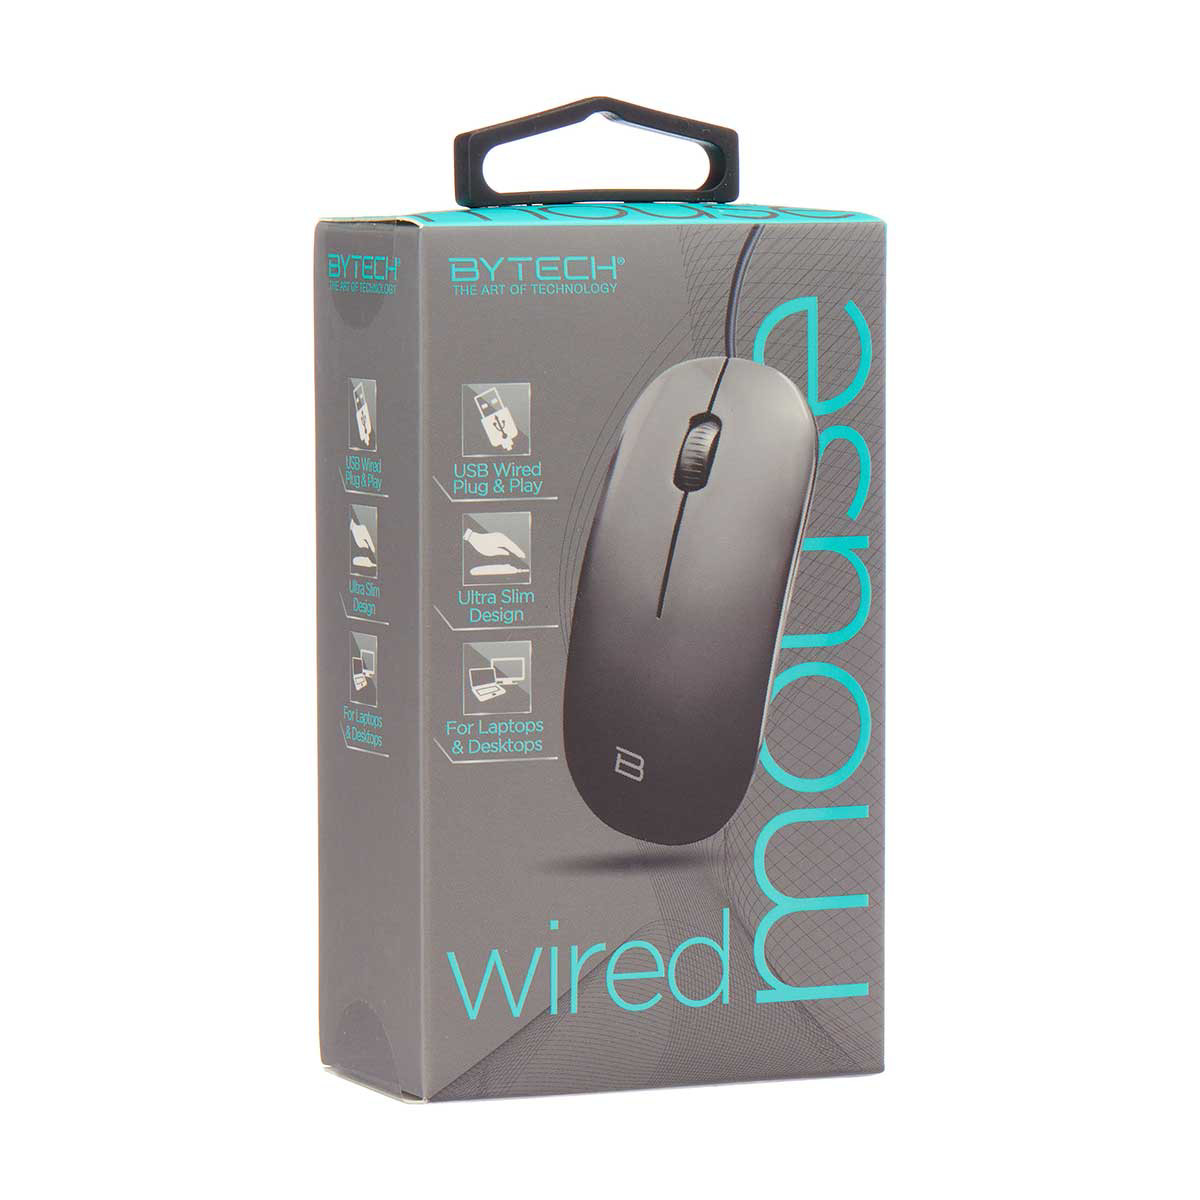 Bytech Wired Mouse